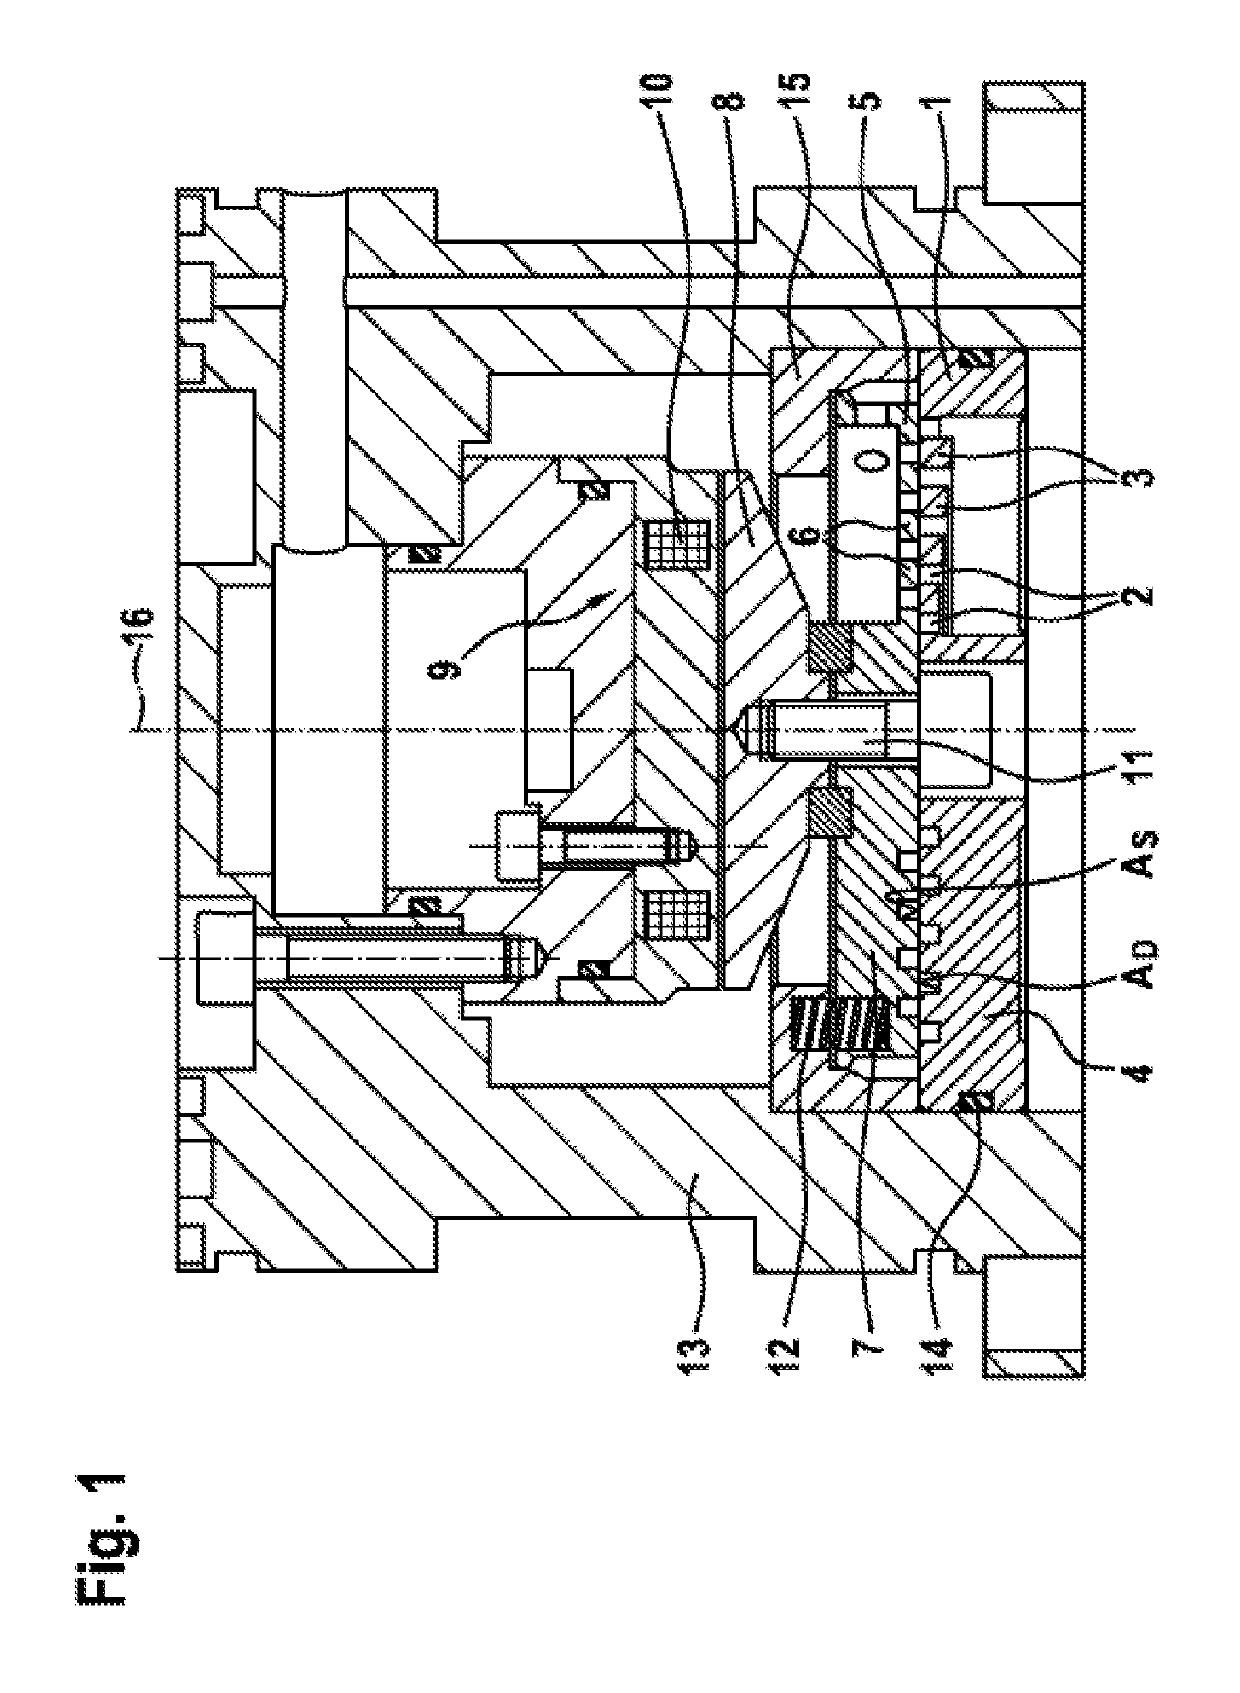 Electromagnetically actuatable gas valve, and method for increasing the seal of an electromagnetically actuatable gas valve